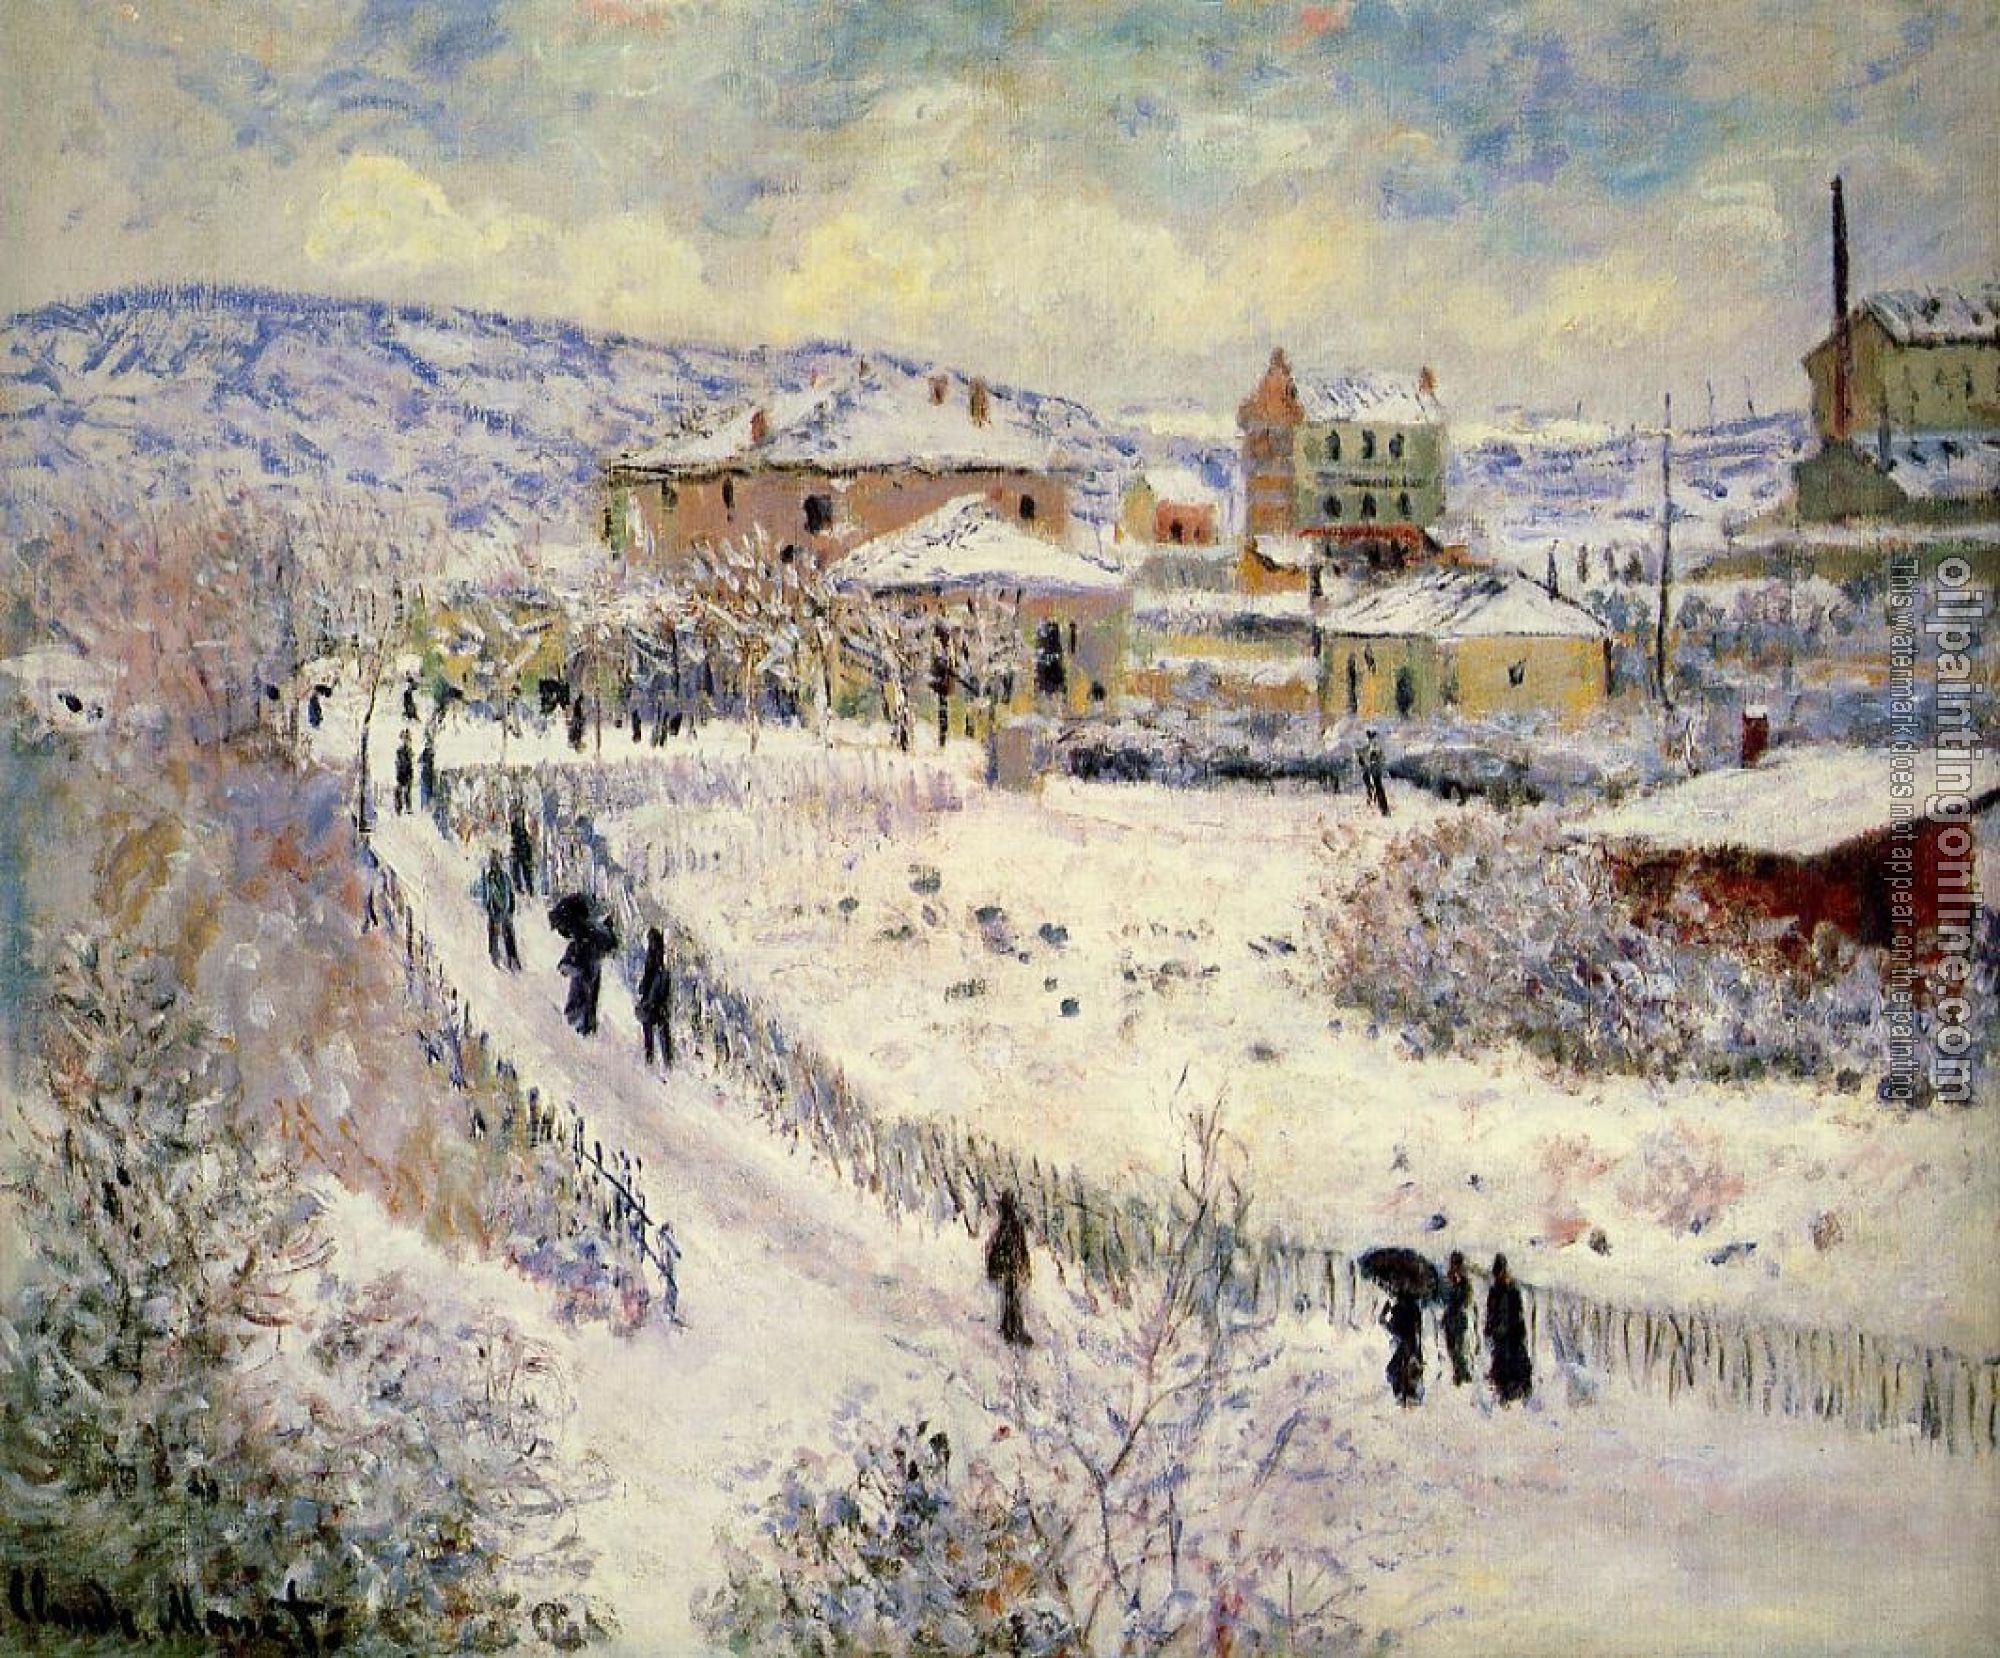 Monet, Claude Oscar - View of Argenteuil in the Snow